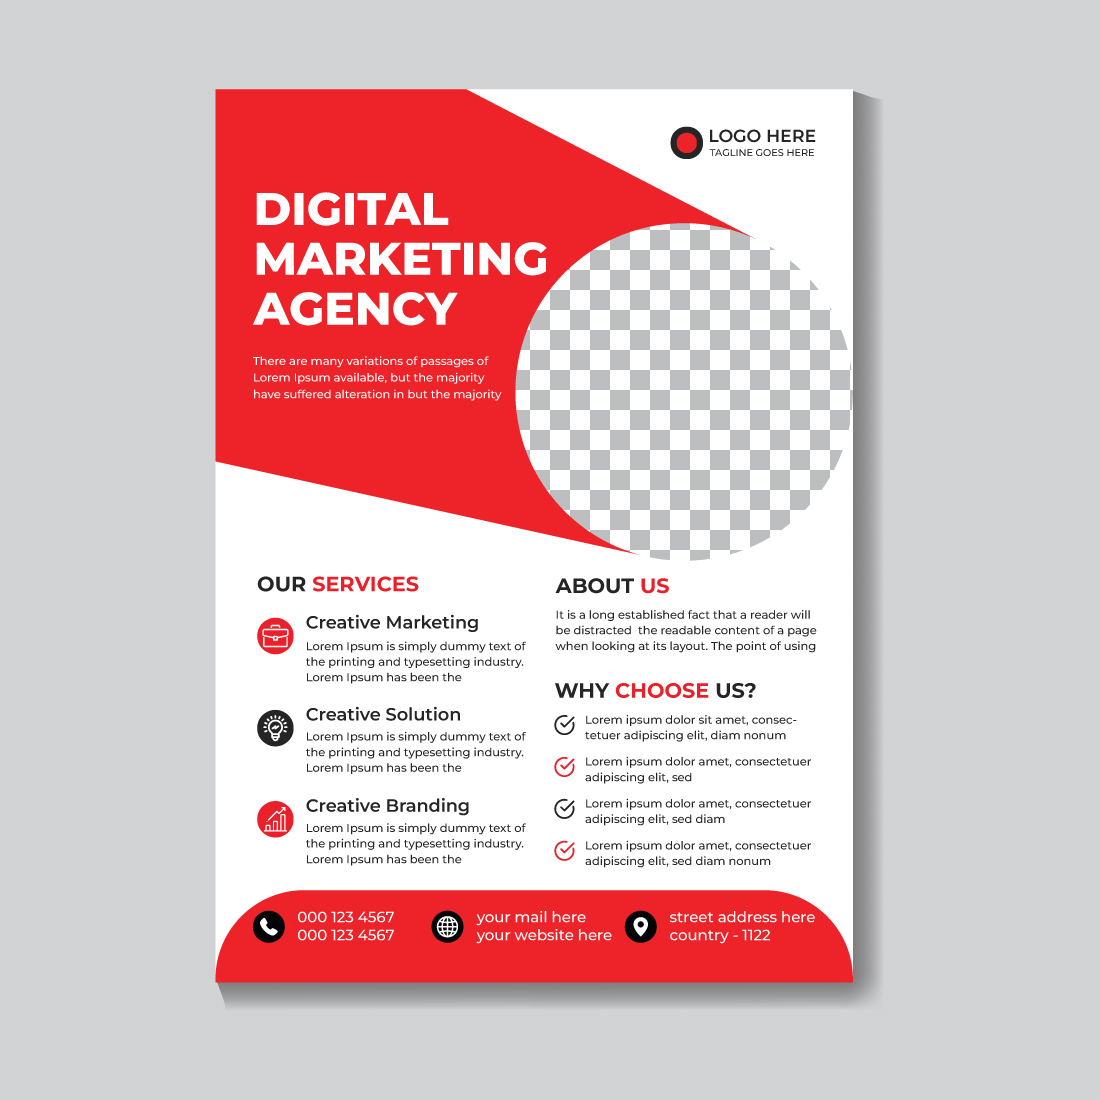 Professional Corporate Creative Modern Marketing Business Flyer Design Template cover image.